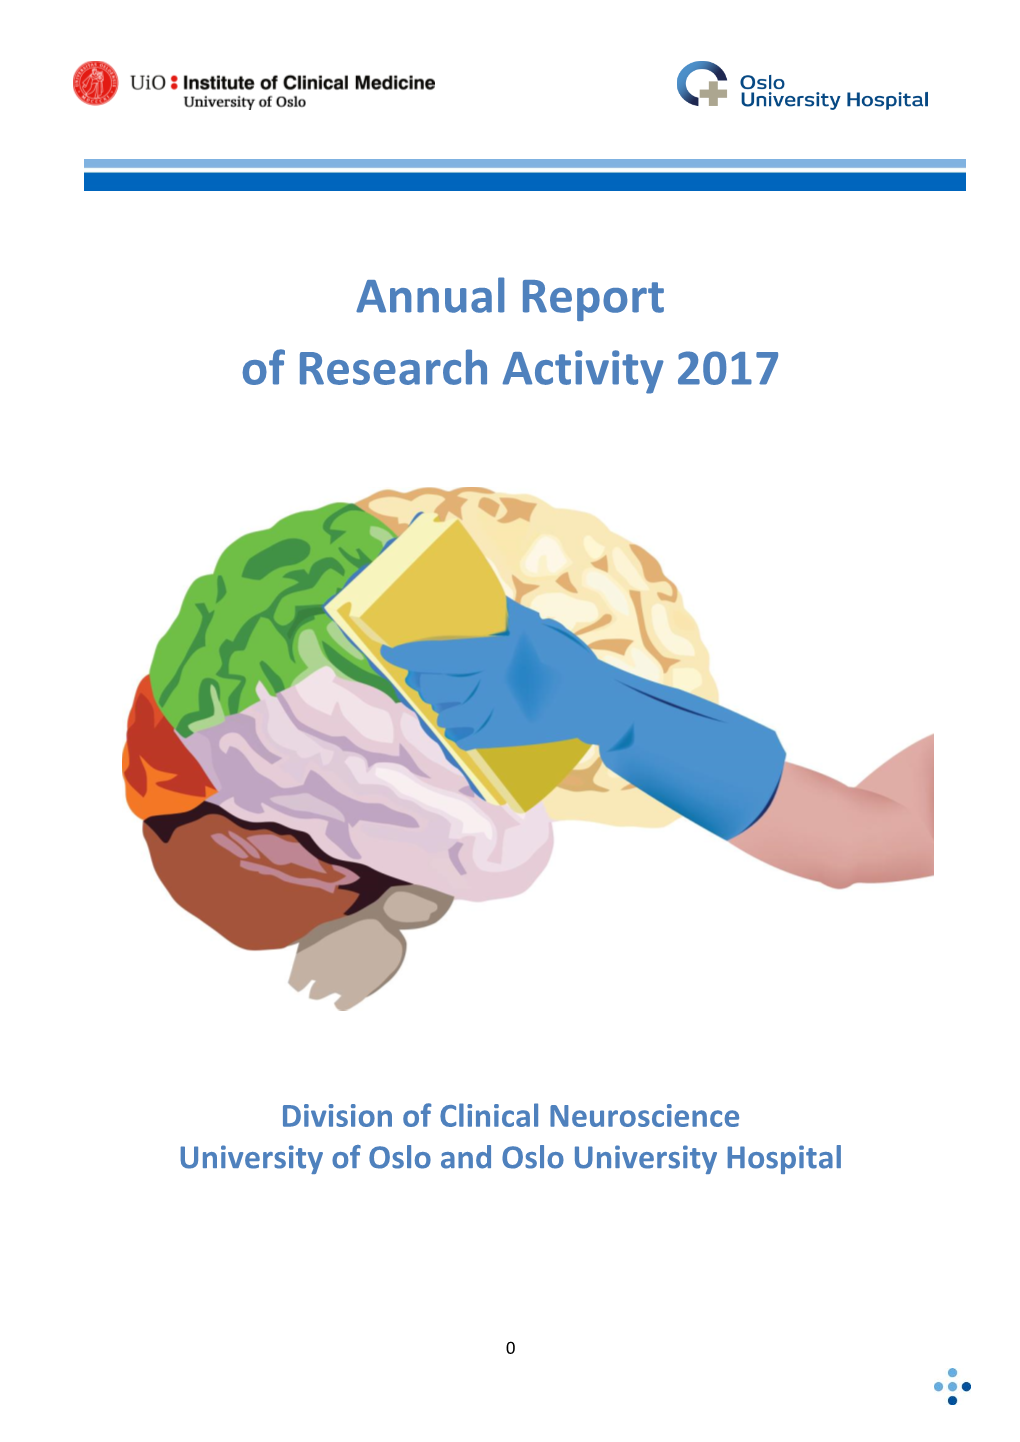 Annual Report of Research Activity 2017